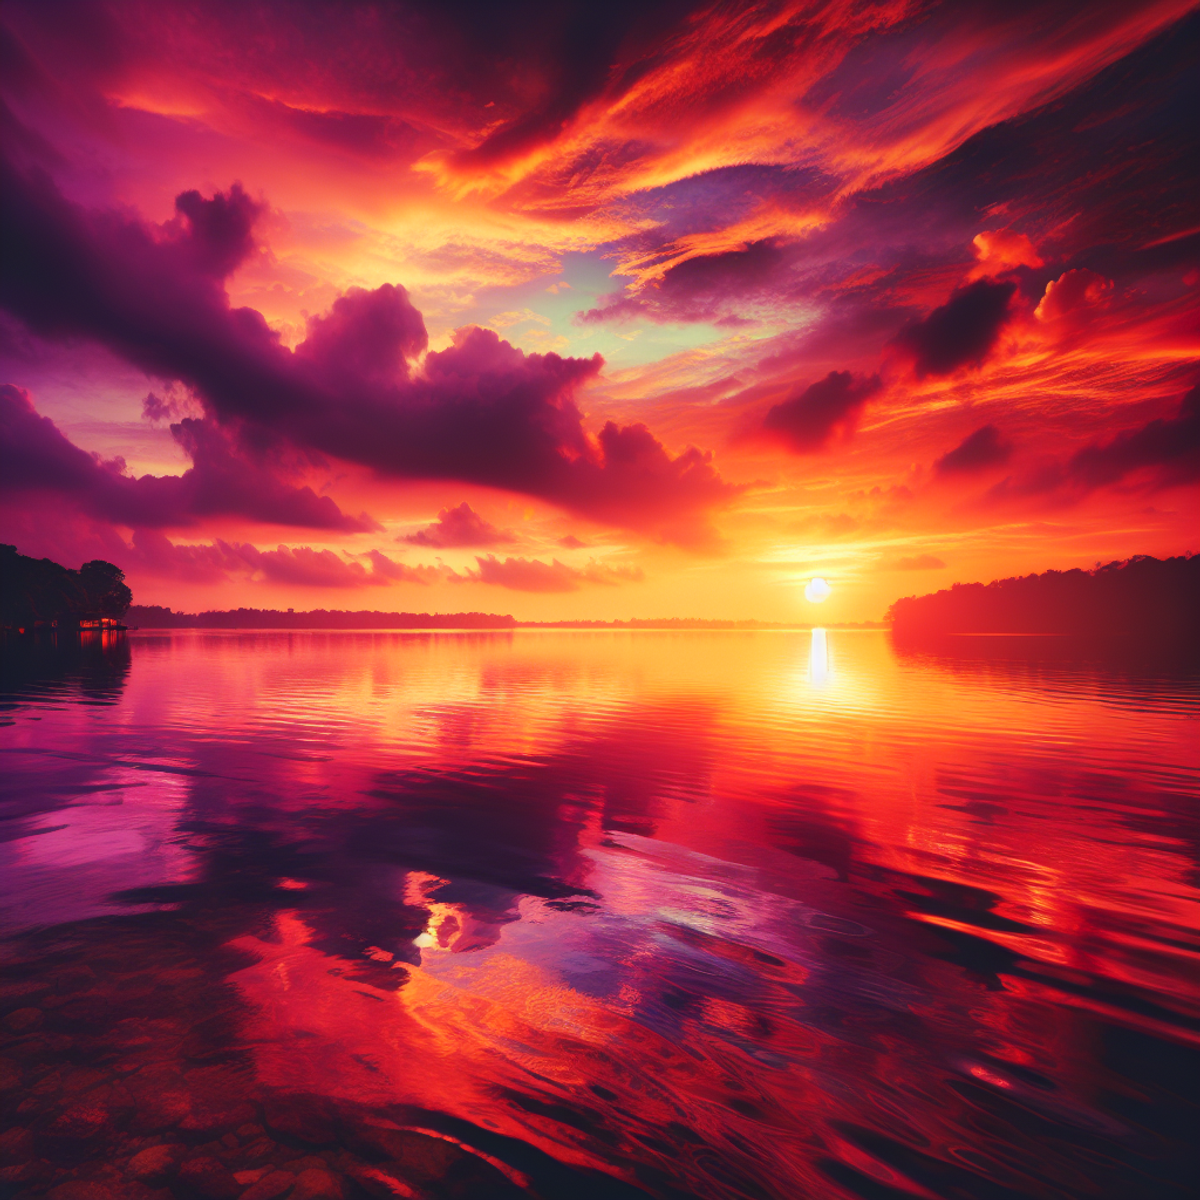 Sunset over Lake Koggala with vibrant orange, red, and purple hues reflecting on the calm waters.